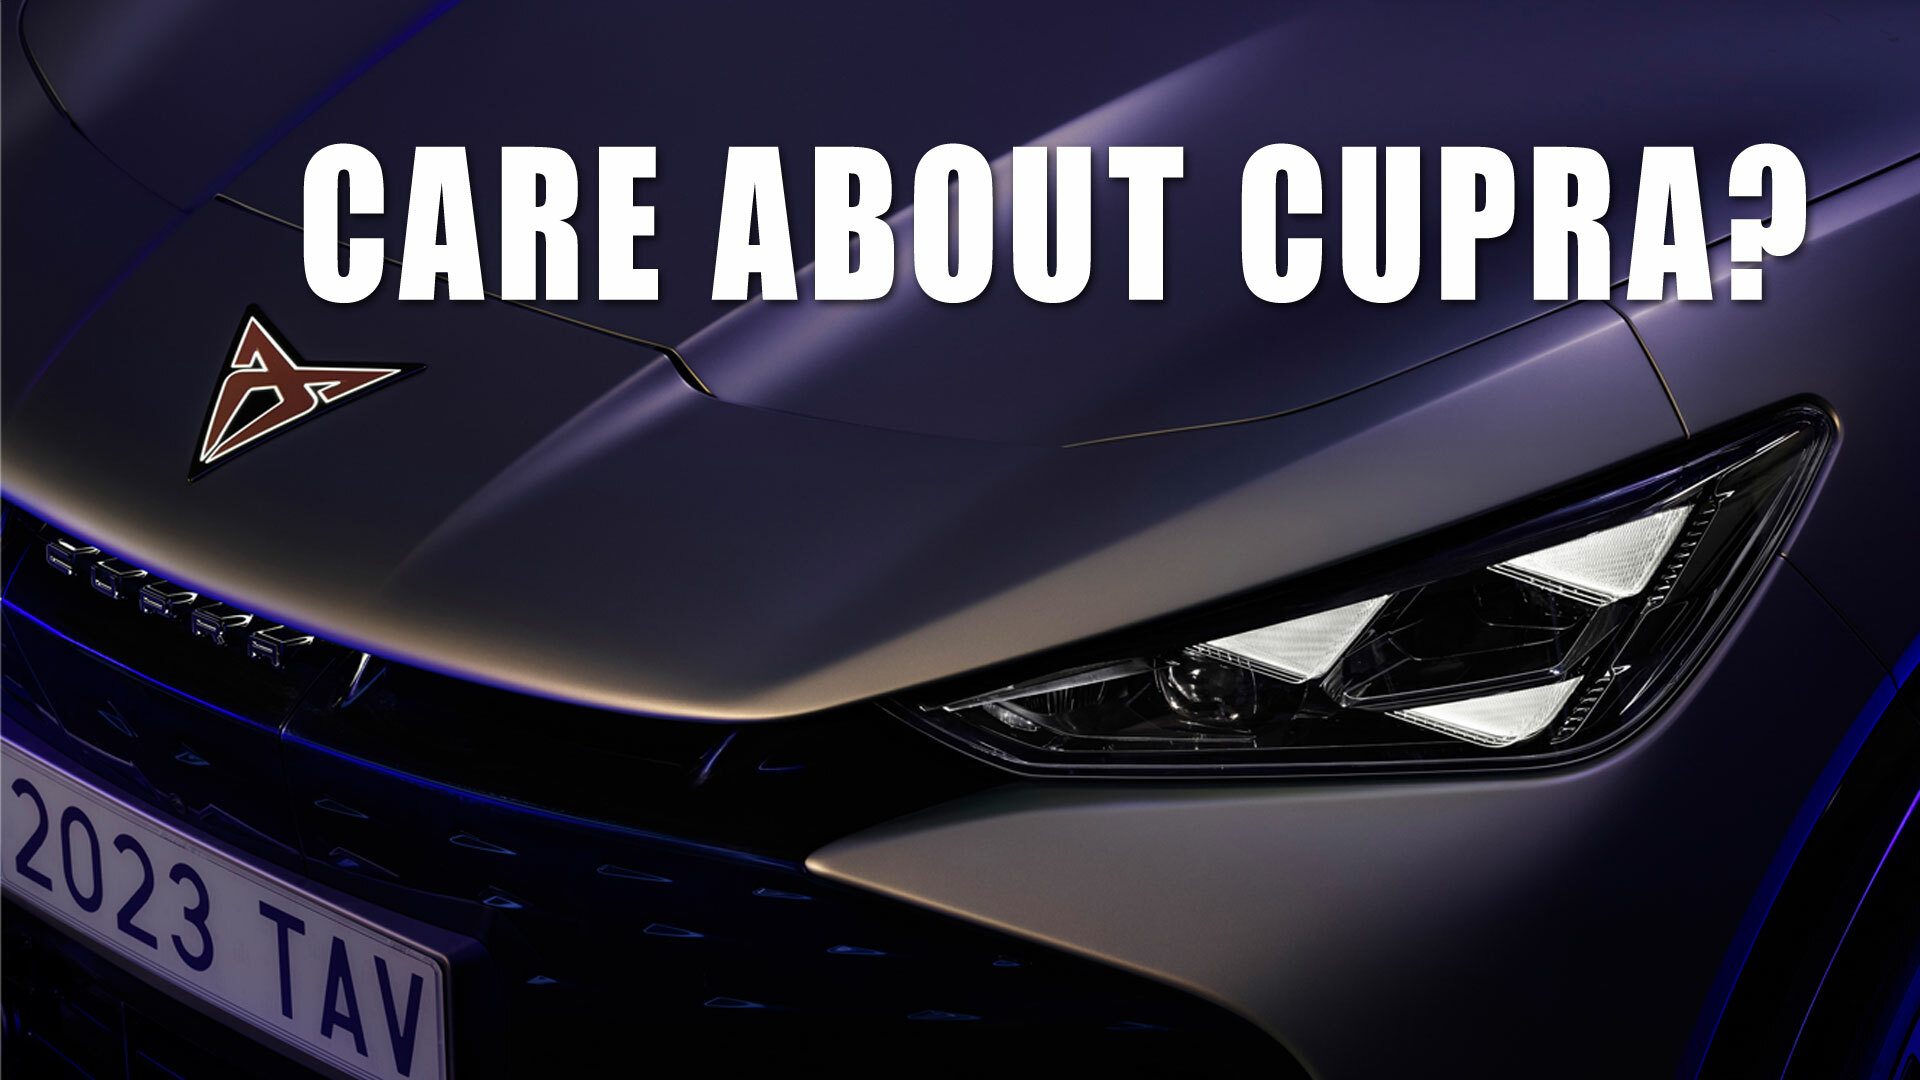 Do You Think Cupra Will Succeed In America?